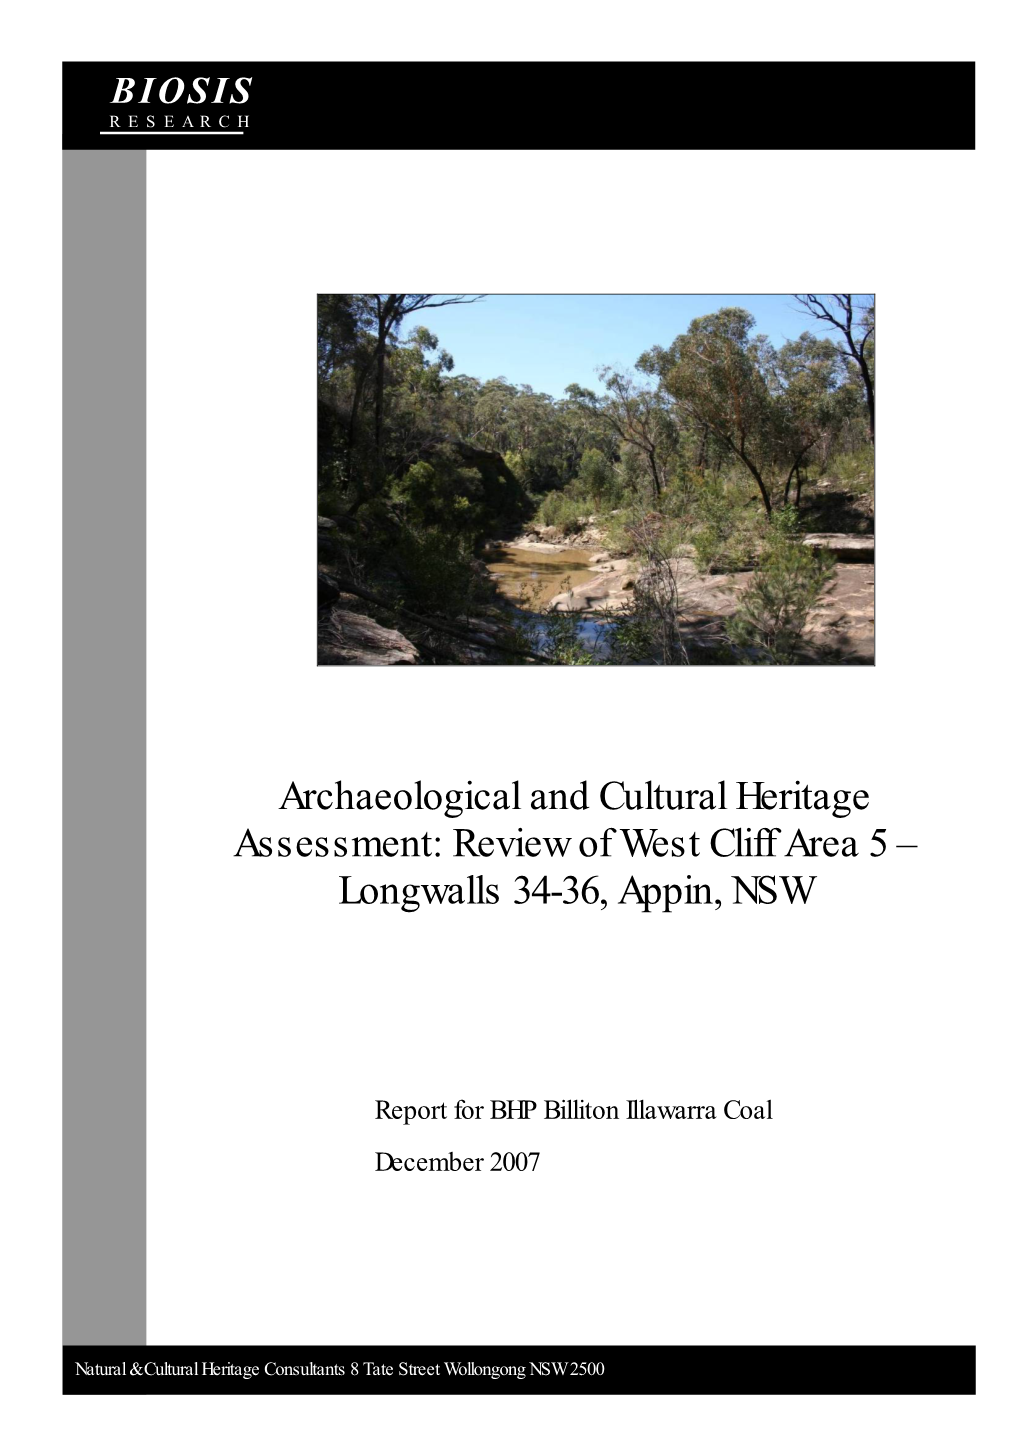 Archaeological and Cultural Heritage Assessment: Review of West Cliff Area 5 – Longwalls 34-36, Appin, NSW